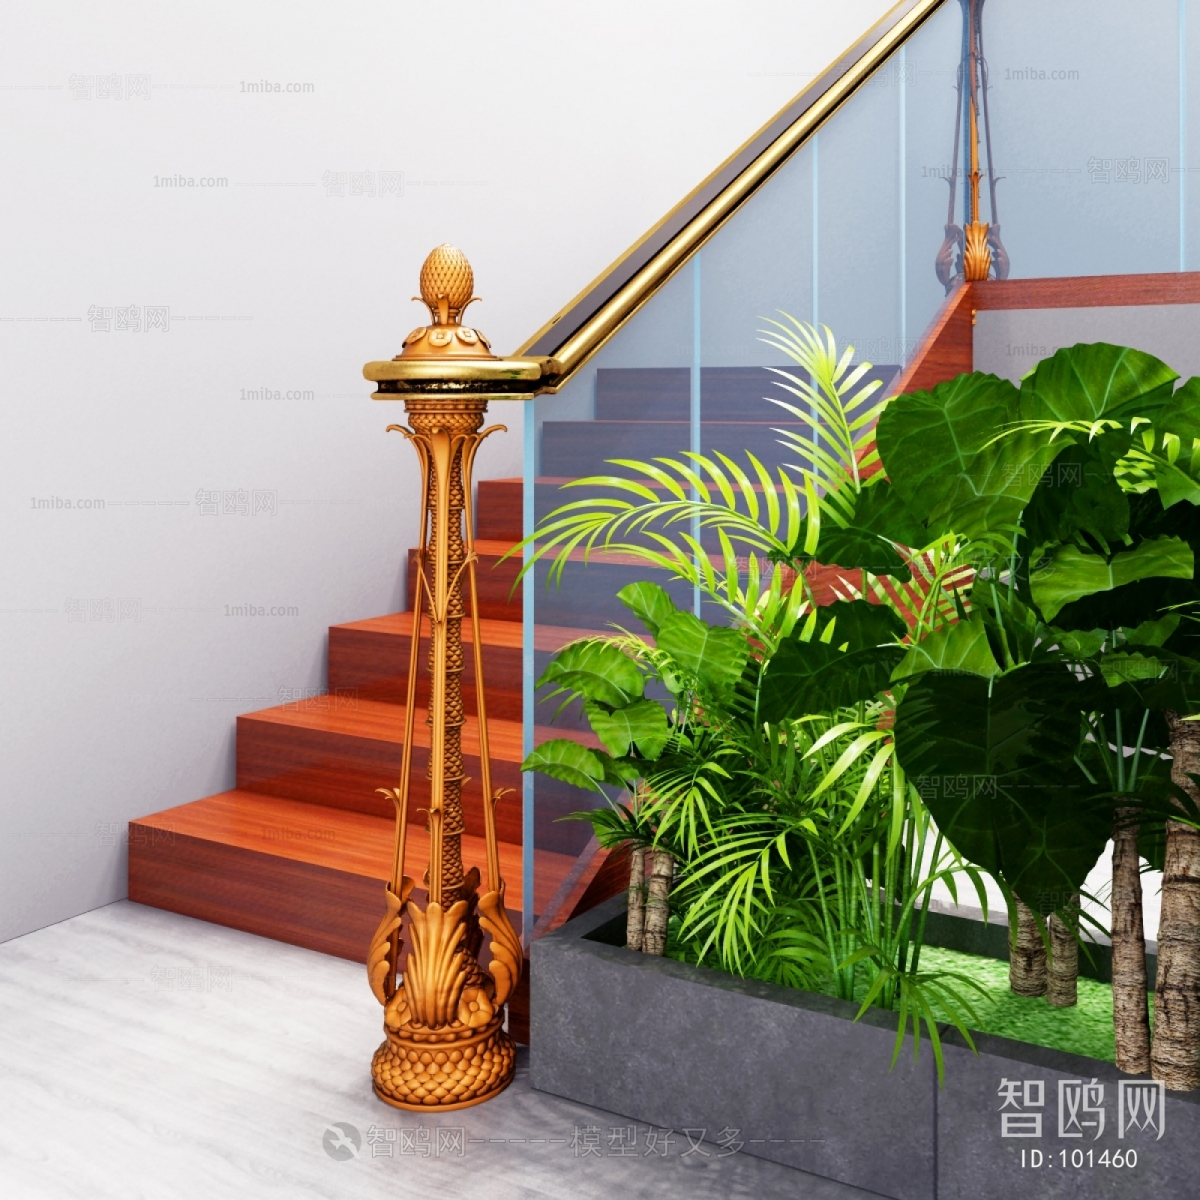 New Classical Style Stair Balustrade/elevator